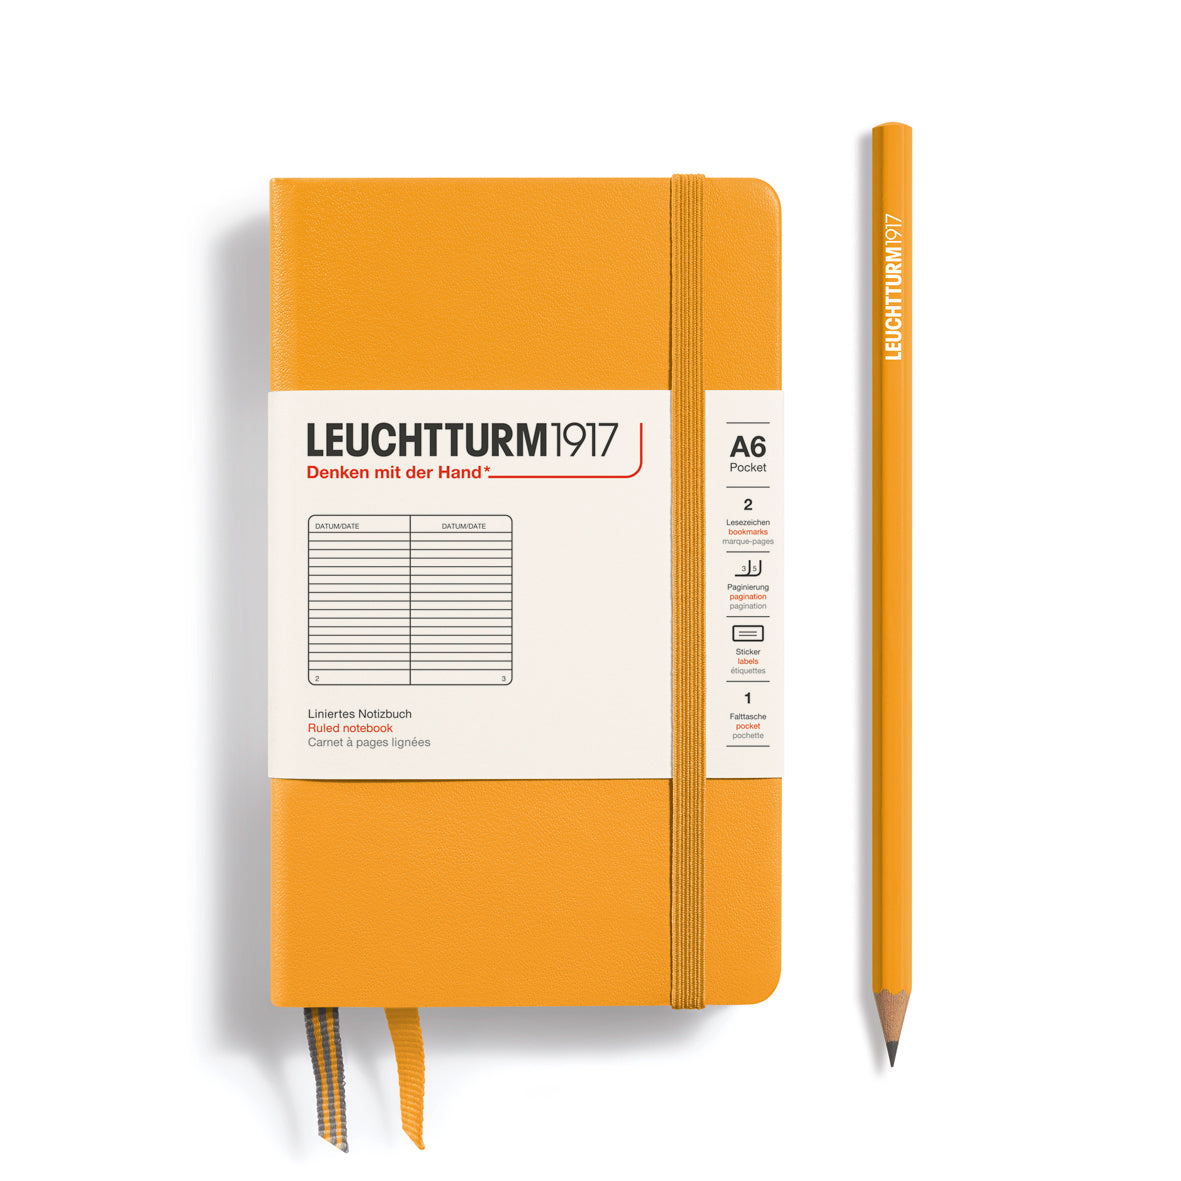 Leuchtturm1917 Notebook A6 Pocket Hardcover in rising sun orange and lined ruling from penny black